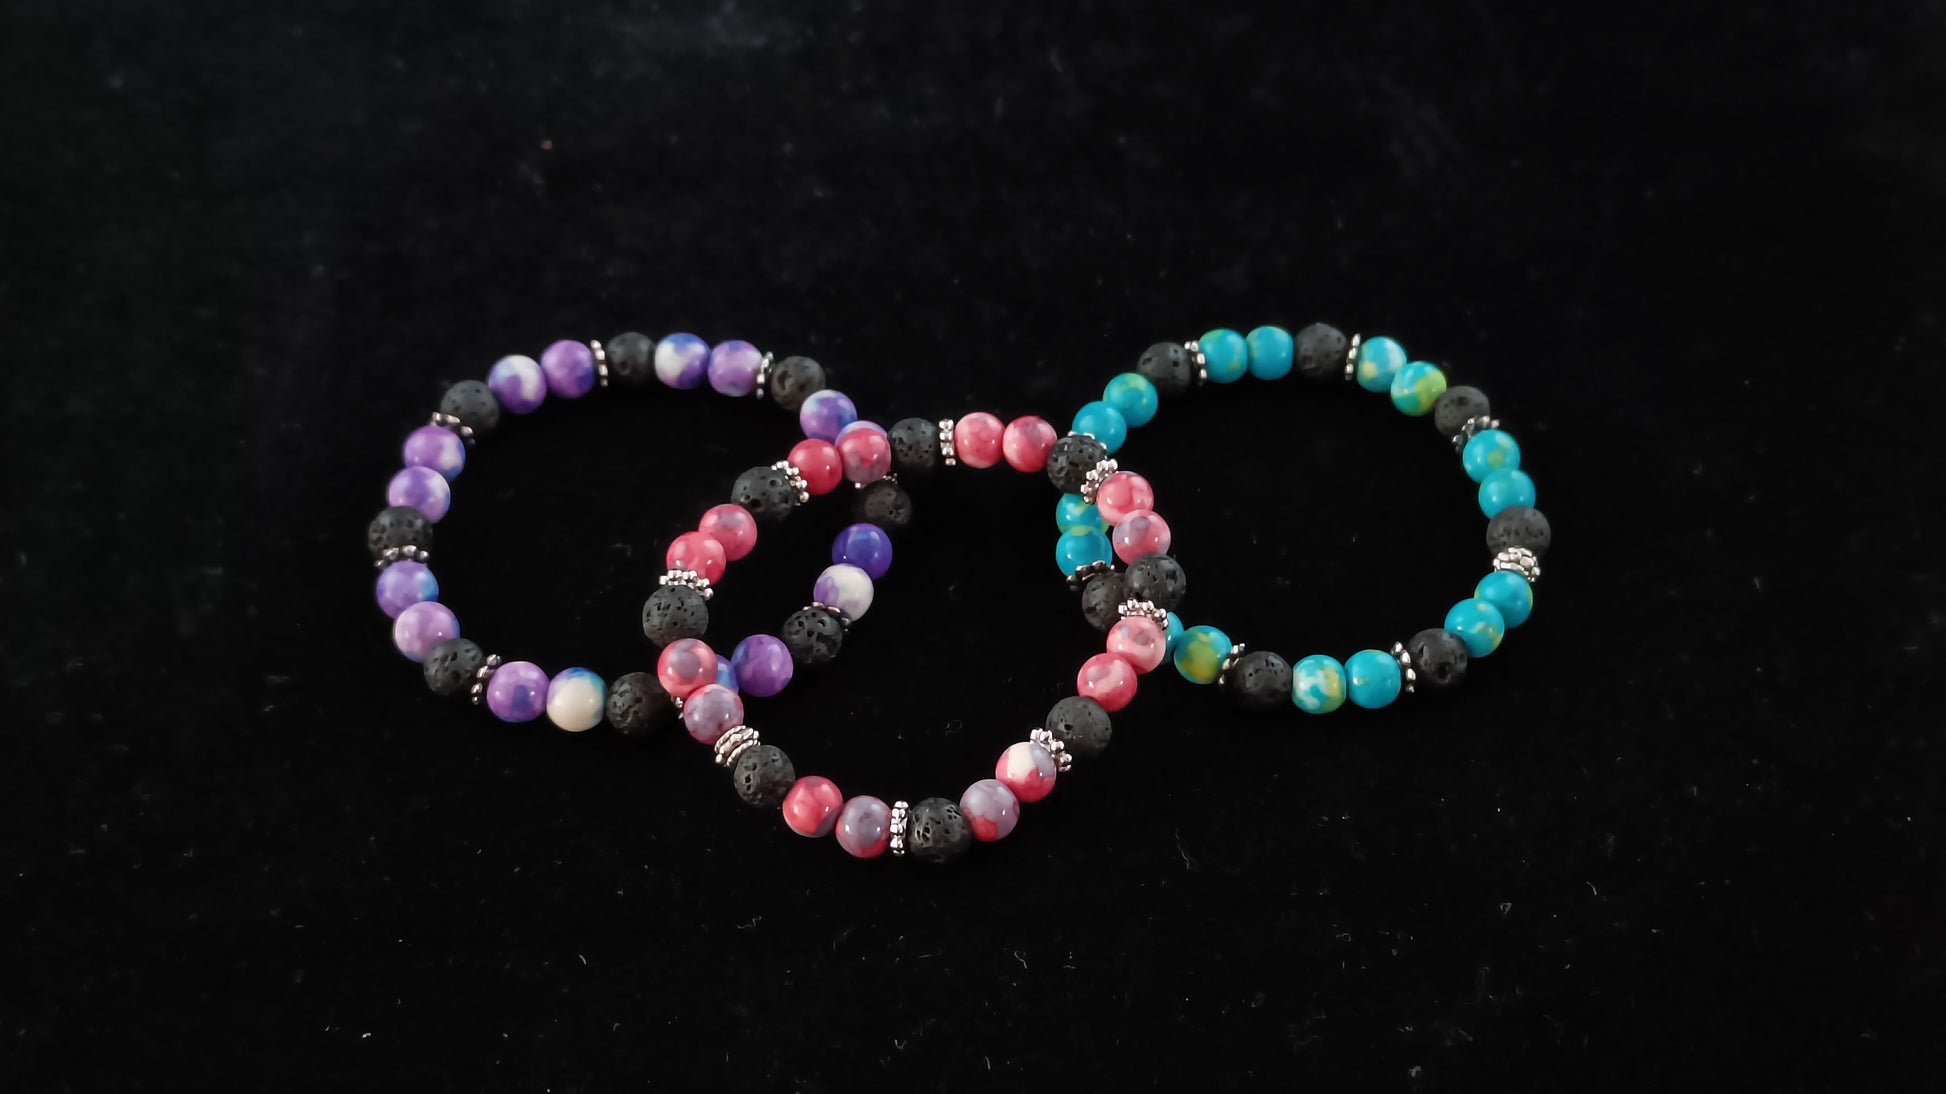 Three kids bracelets sitting on a dark black display cloth. The bracelet in the middle has a mix of bright red stones and lava beads. The bracelet on the left has bright purple stones and lava beads. The bracelet on the right has bright blue stones and lava beads.